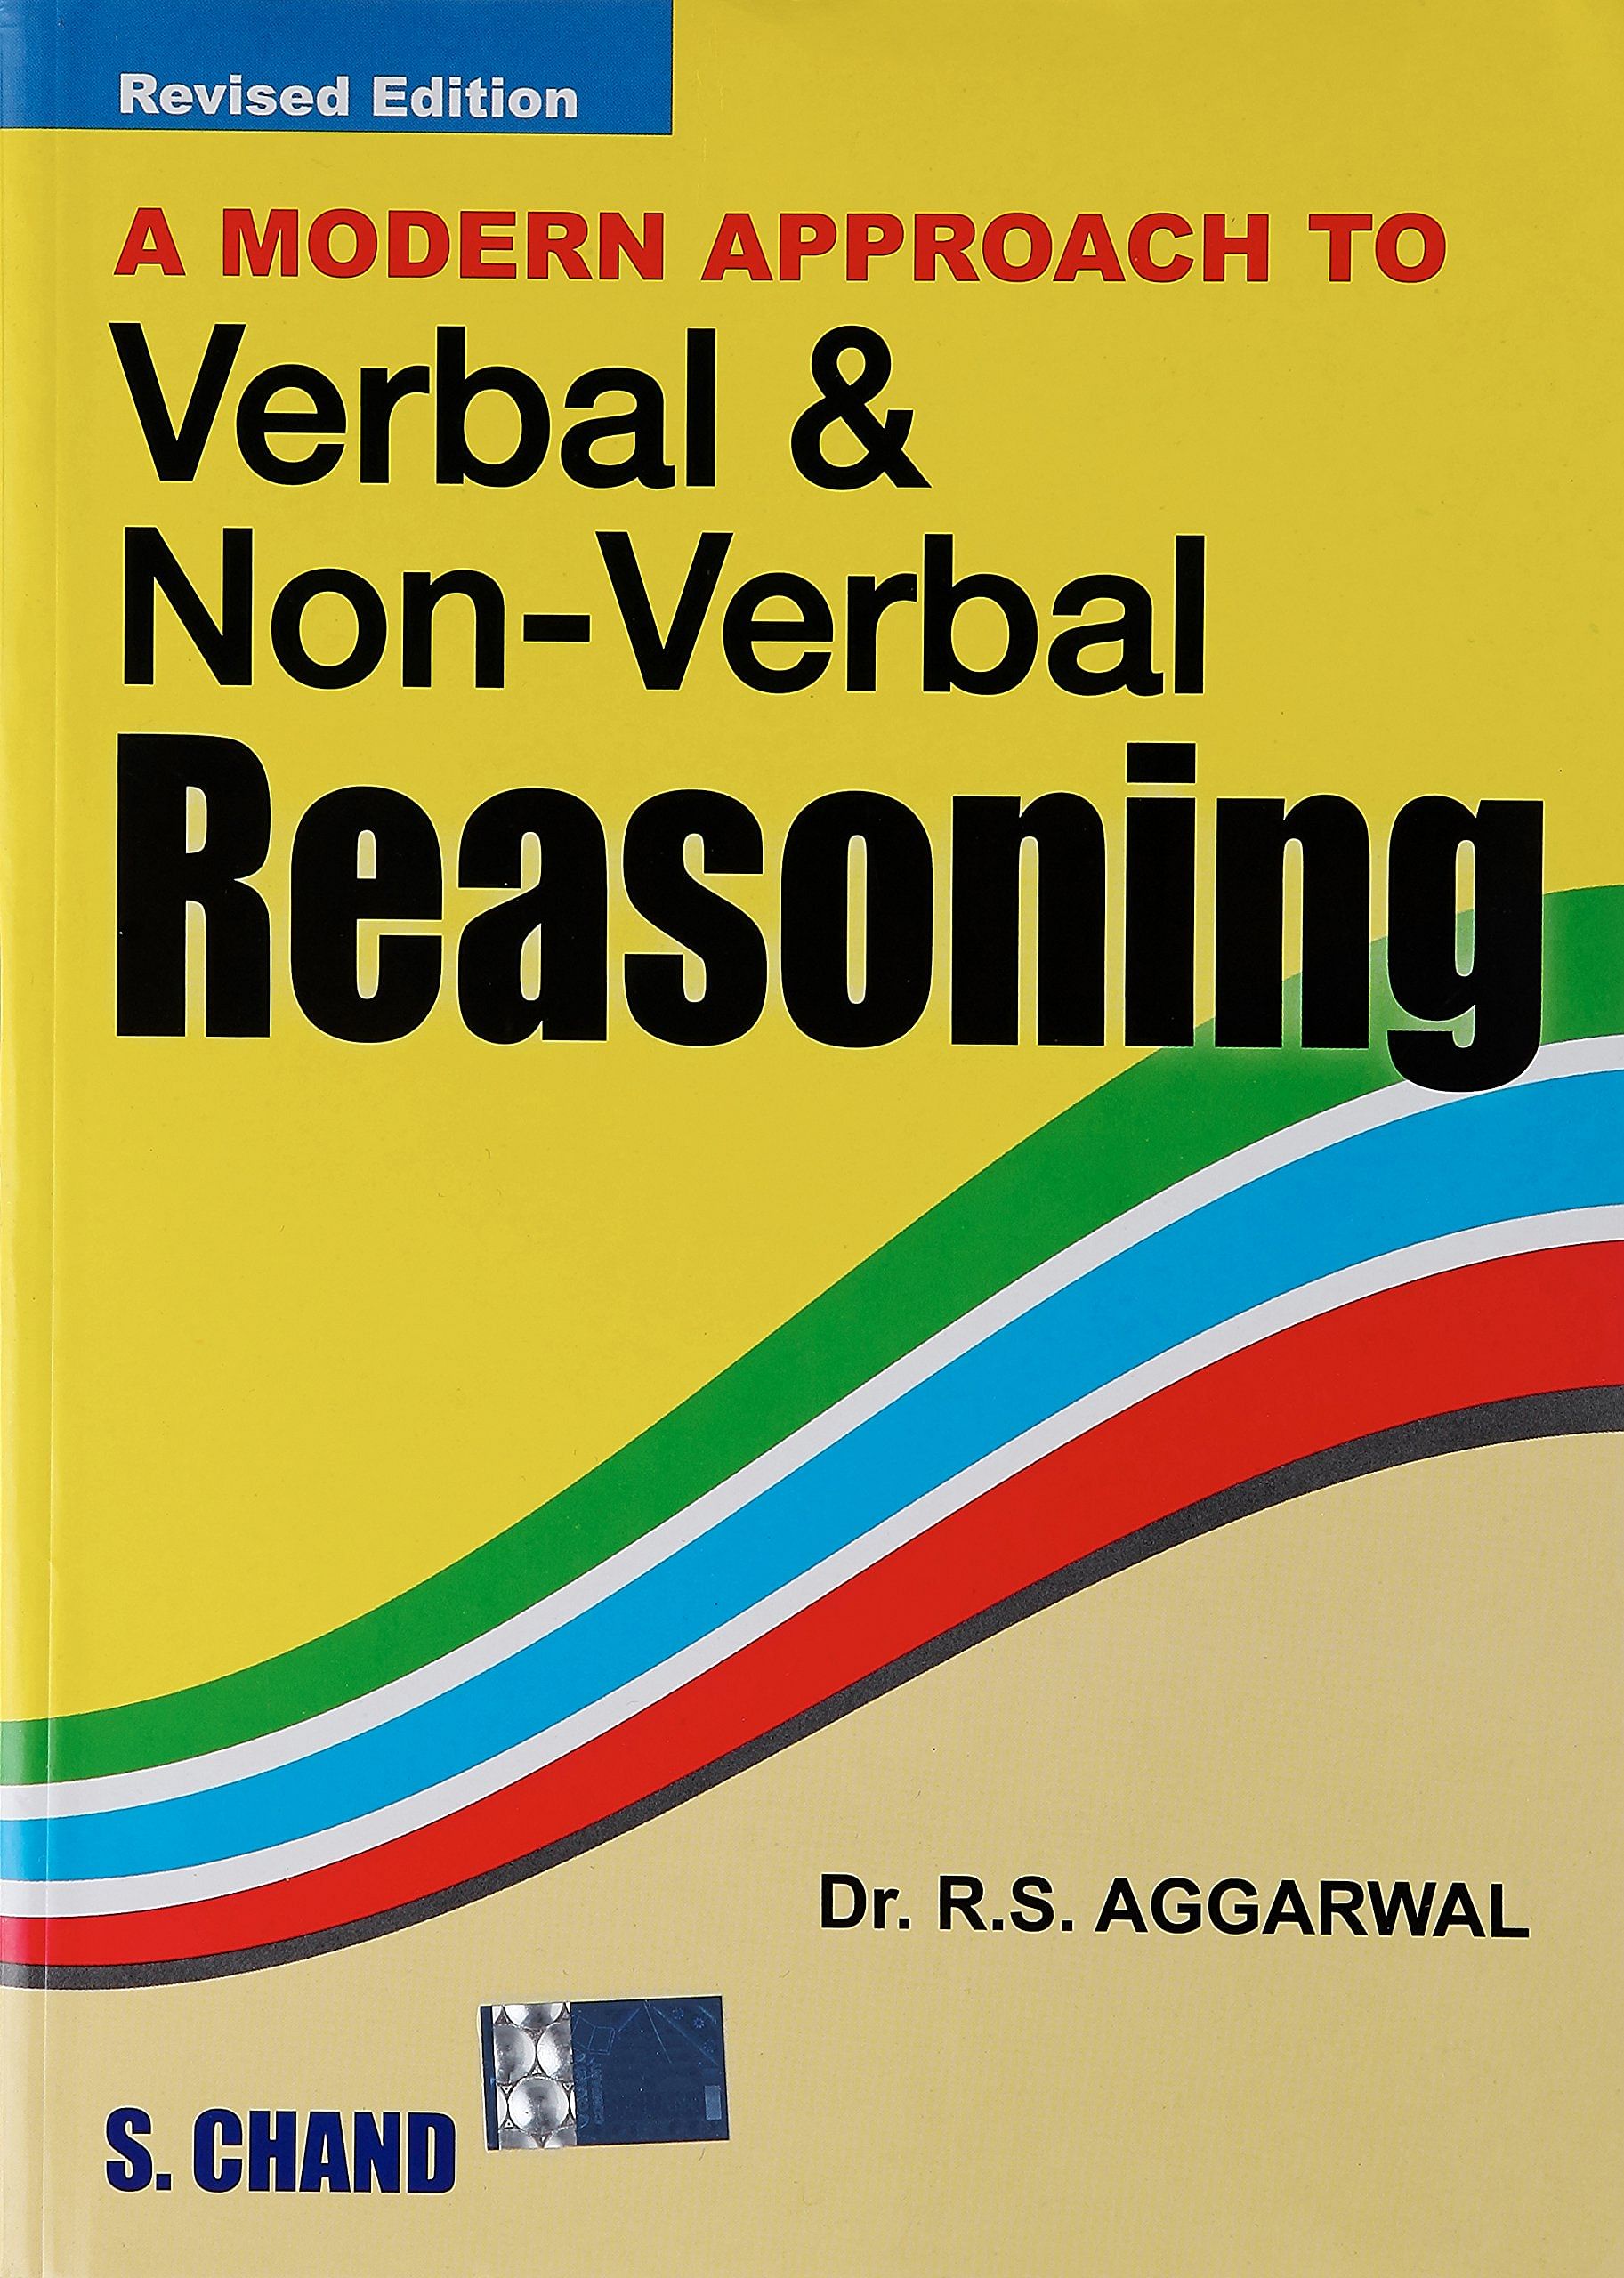 RS Aggarwal books on Verbal/Logical Reasoning, Aptitude and reading comprehension